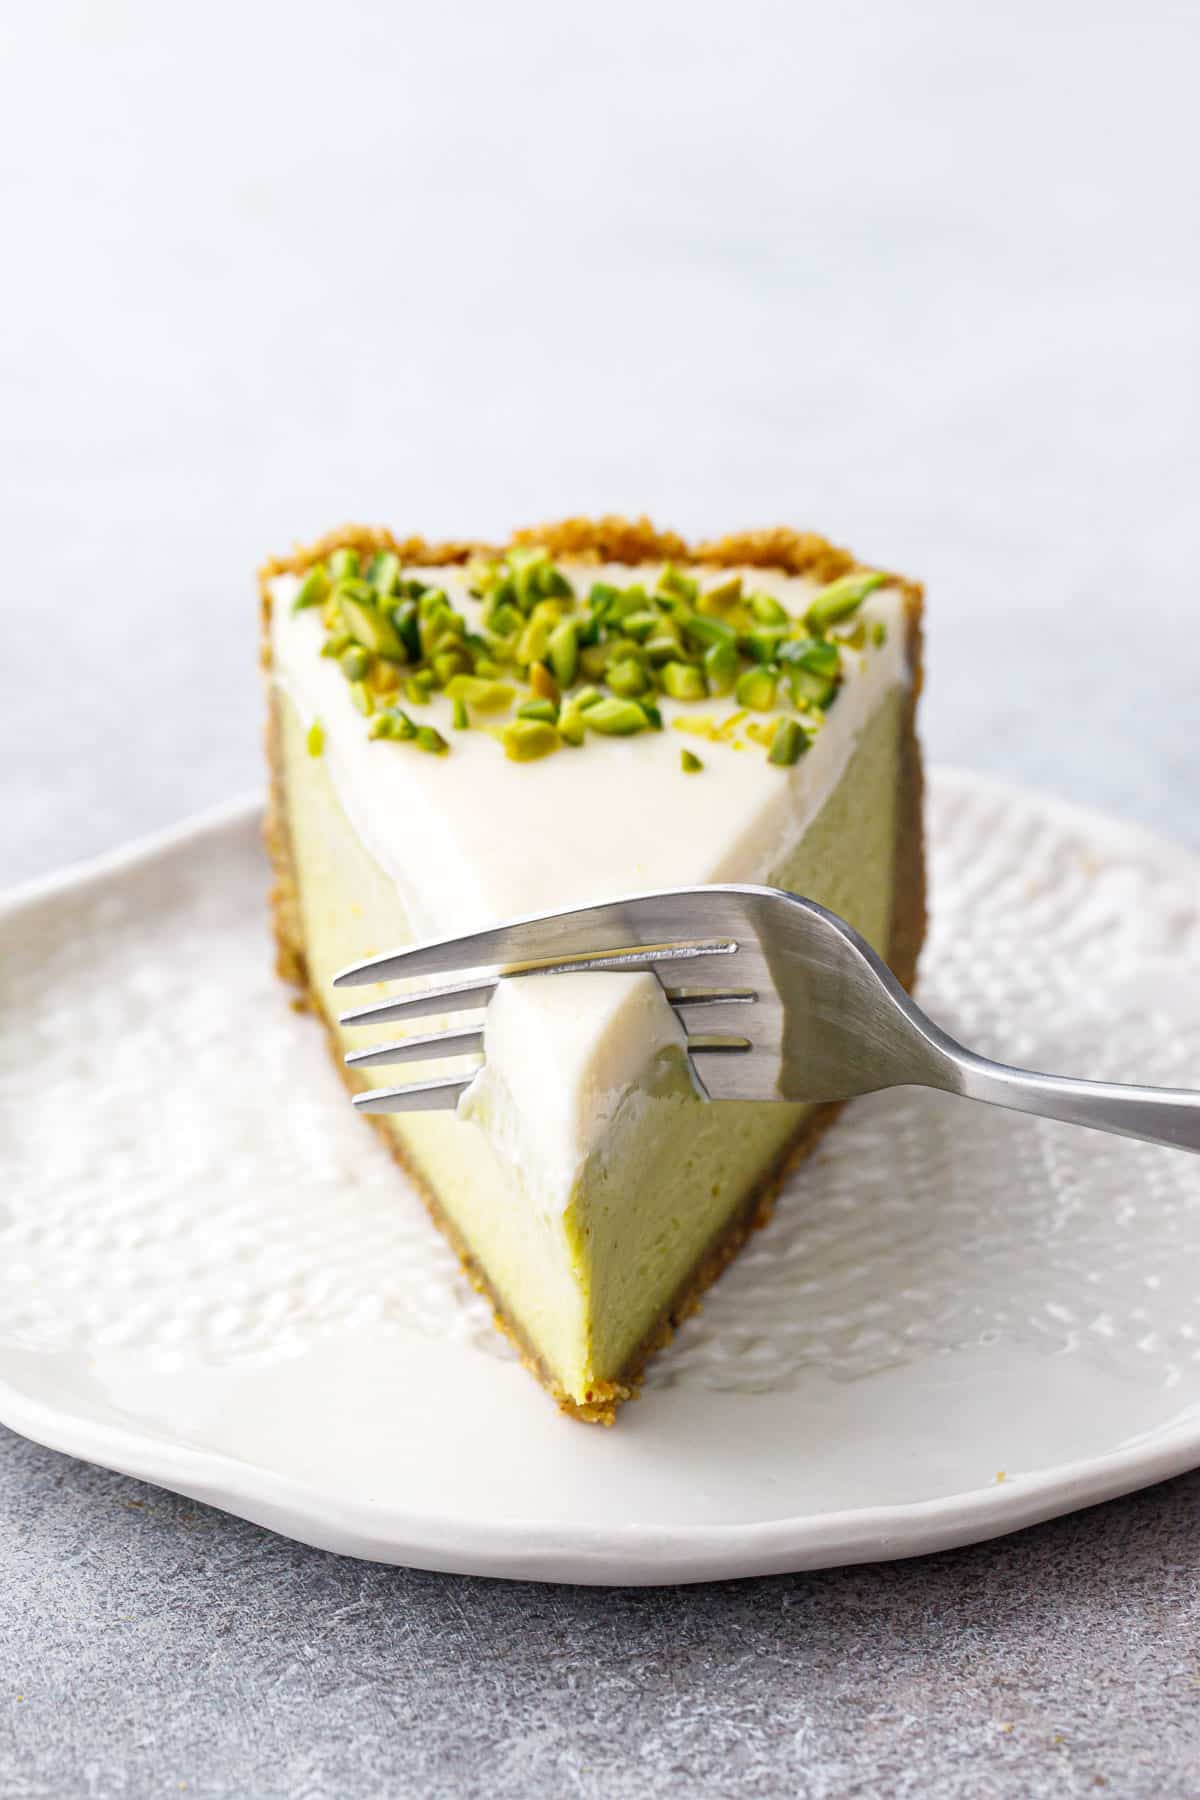 Triangular slice of Pistachio Sour Cream Cheesecake on a white plate, with a fork cutting through the tip of the slice to show the creamy texture.